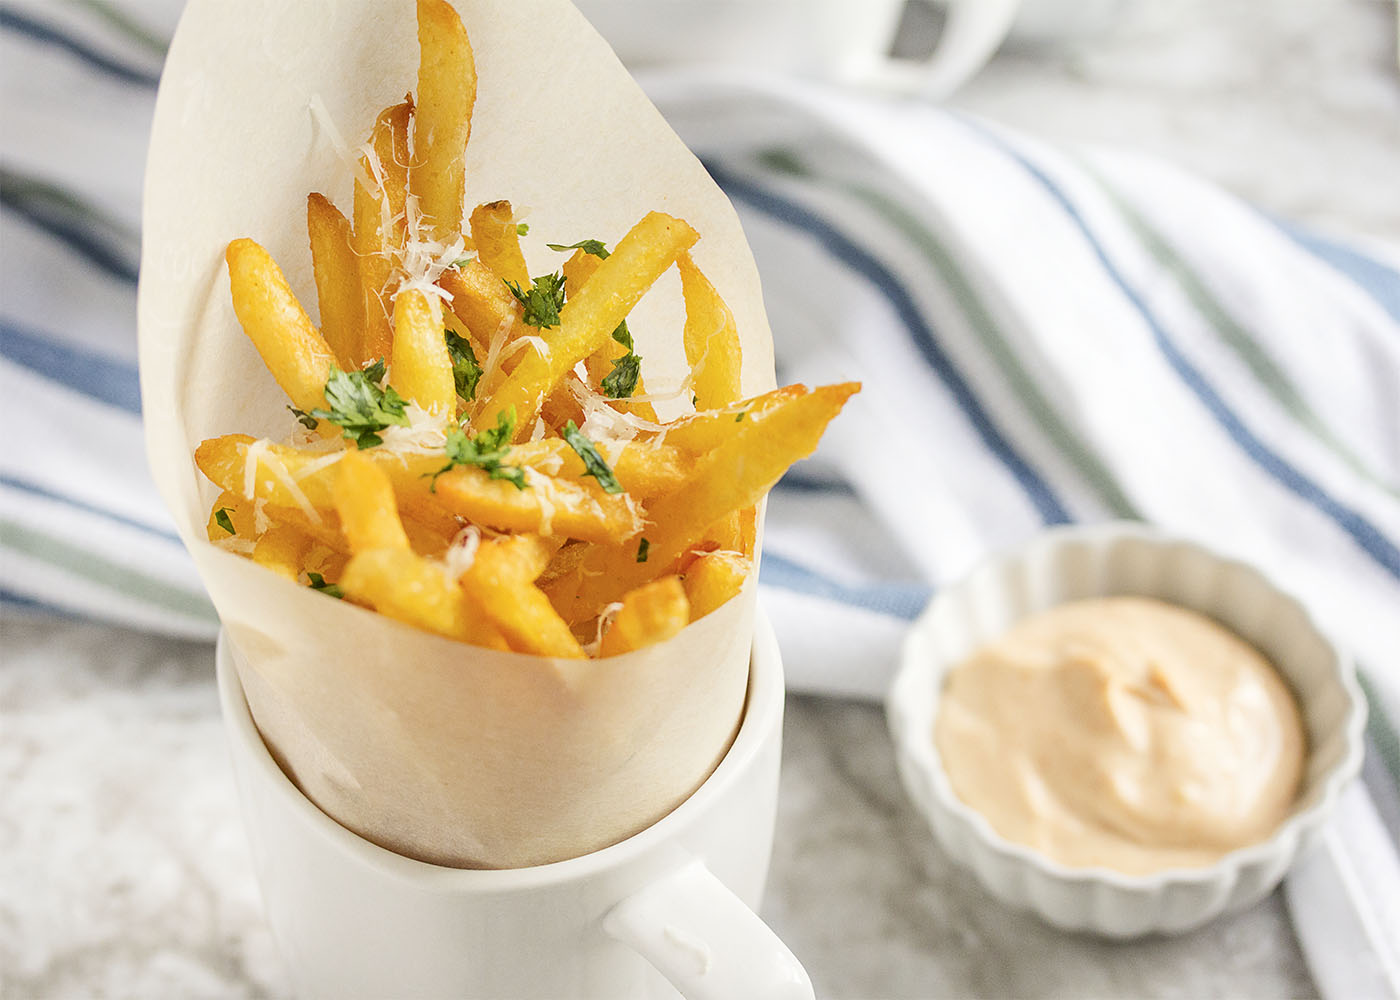 Parmesan Truffle Fries - Use frozen, bagged fries to have tasty truffle fries, covered in truffle oil, parmesan, and parsley on the table in less than 15 minutes. | justalittlebitofbacon.com